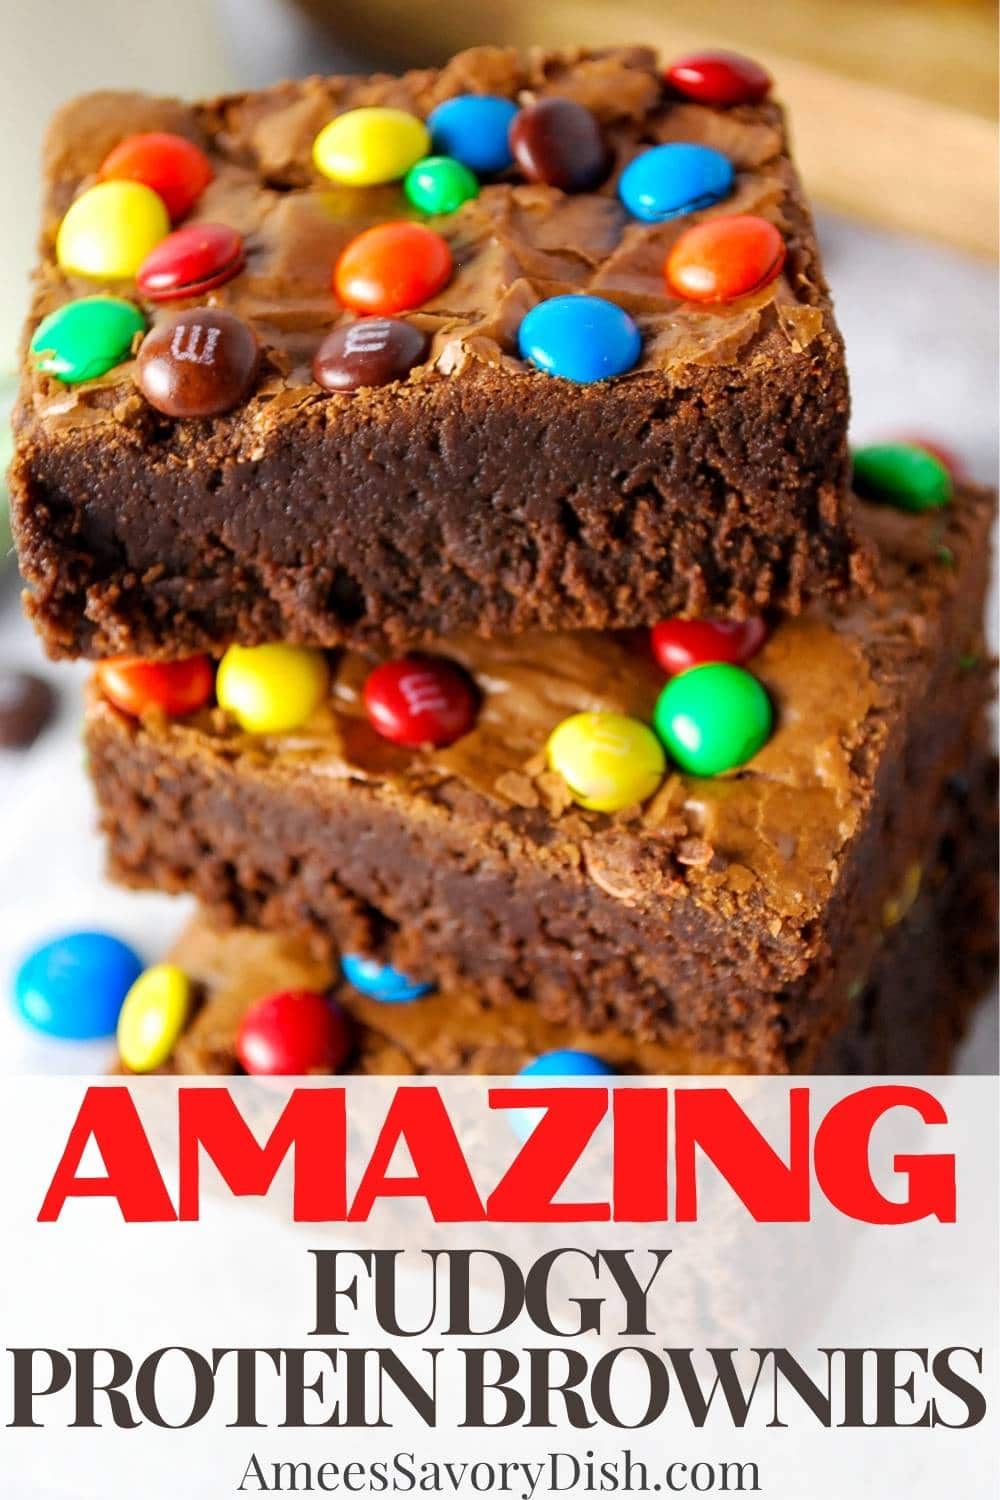 These fudgy protein brownies with M&M's are heavenly! Indulge in a thick, rich chocolate brownie while taking in an extra protein boost. via @Ameessavorydish